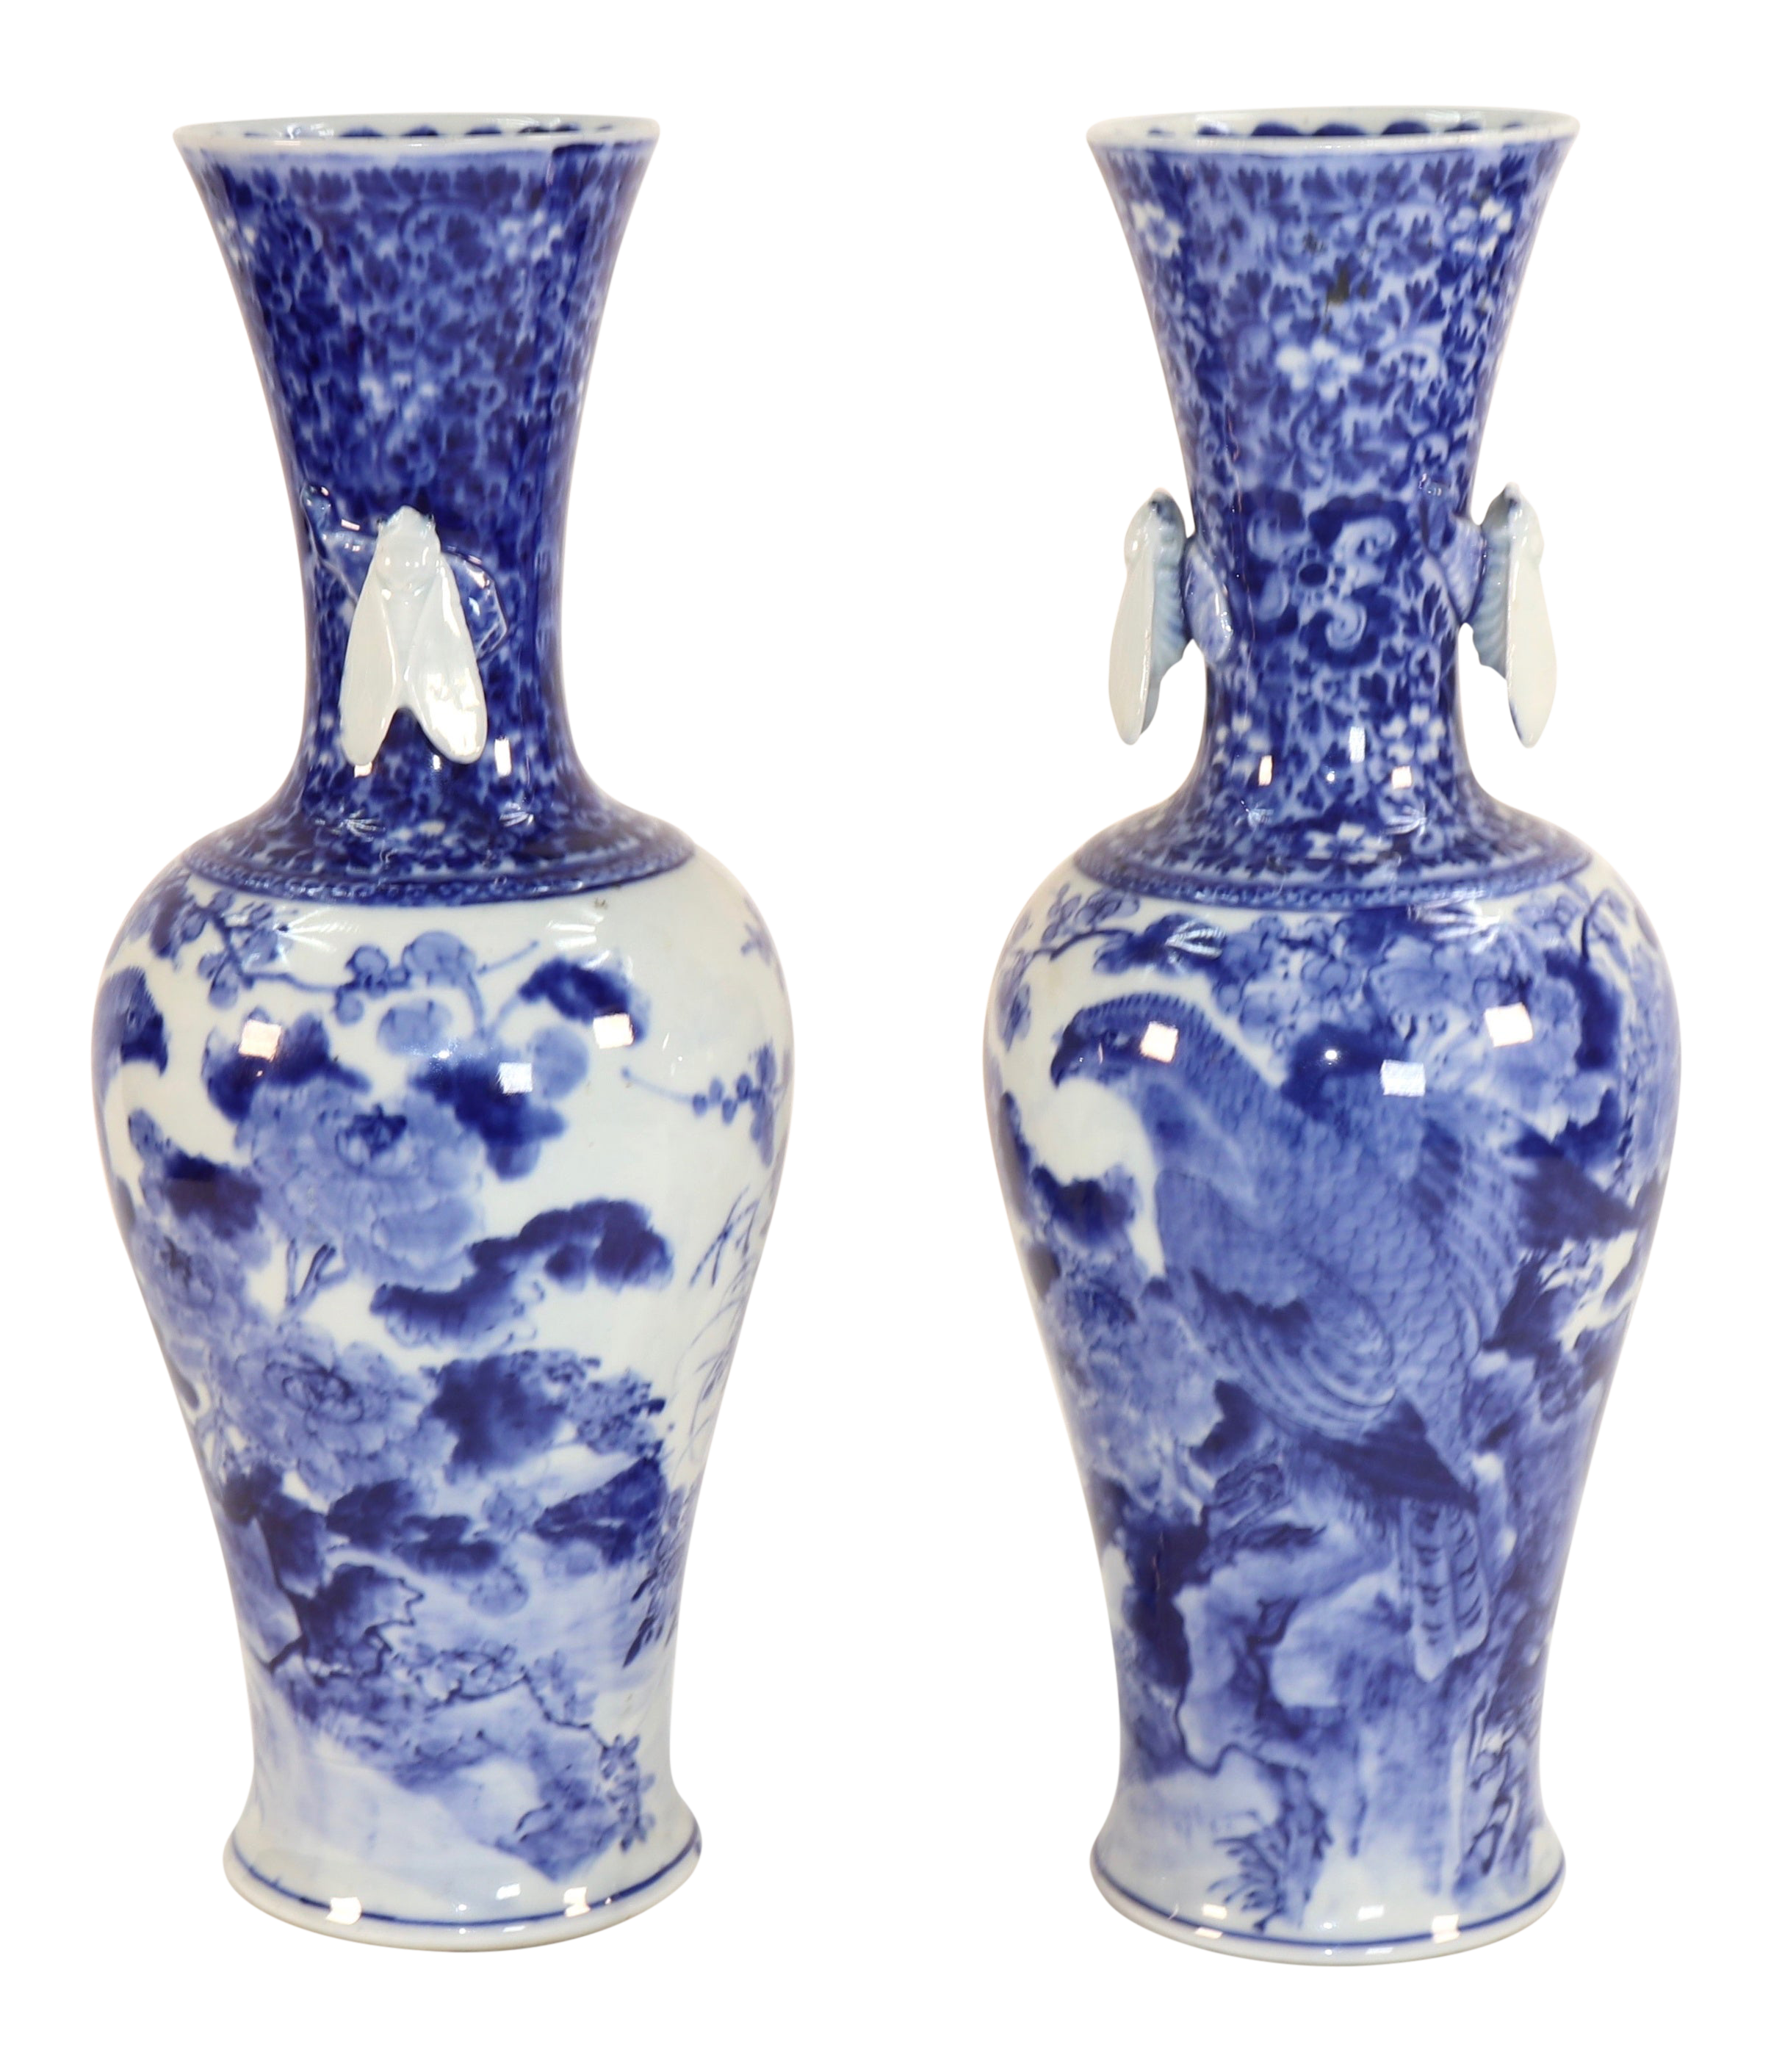 A Pair of Early 20th Century Japanese Blue and White Hawk and Peony Vases